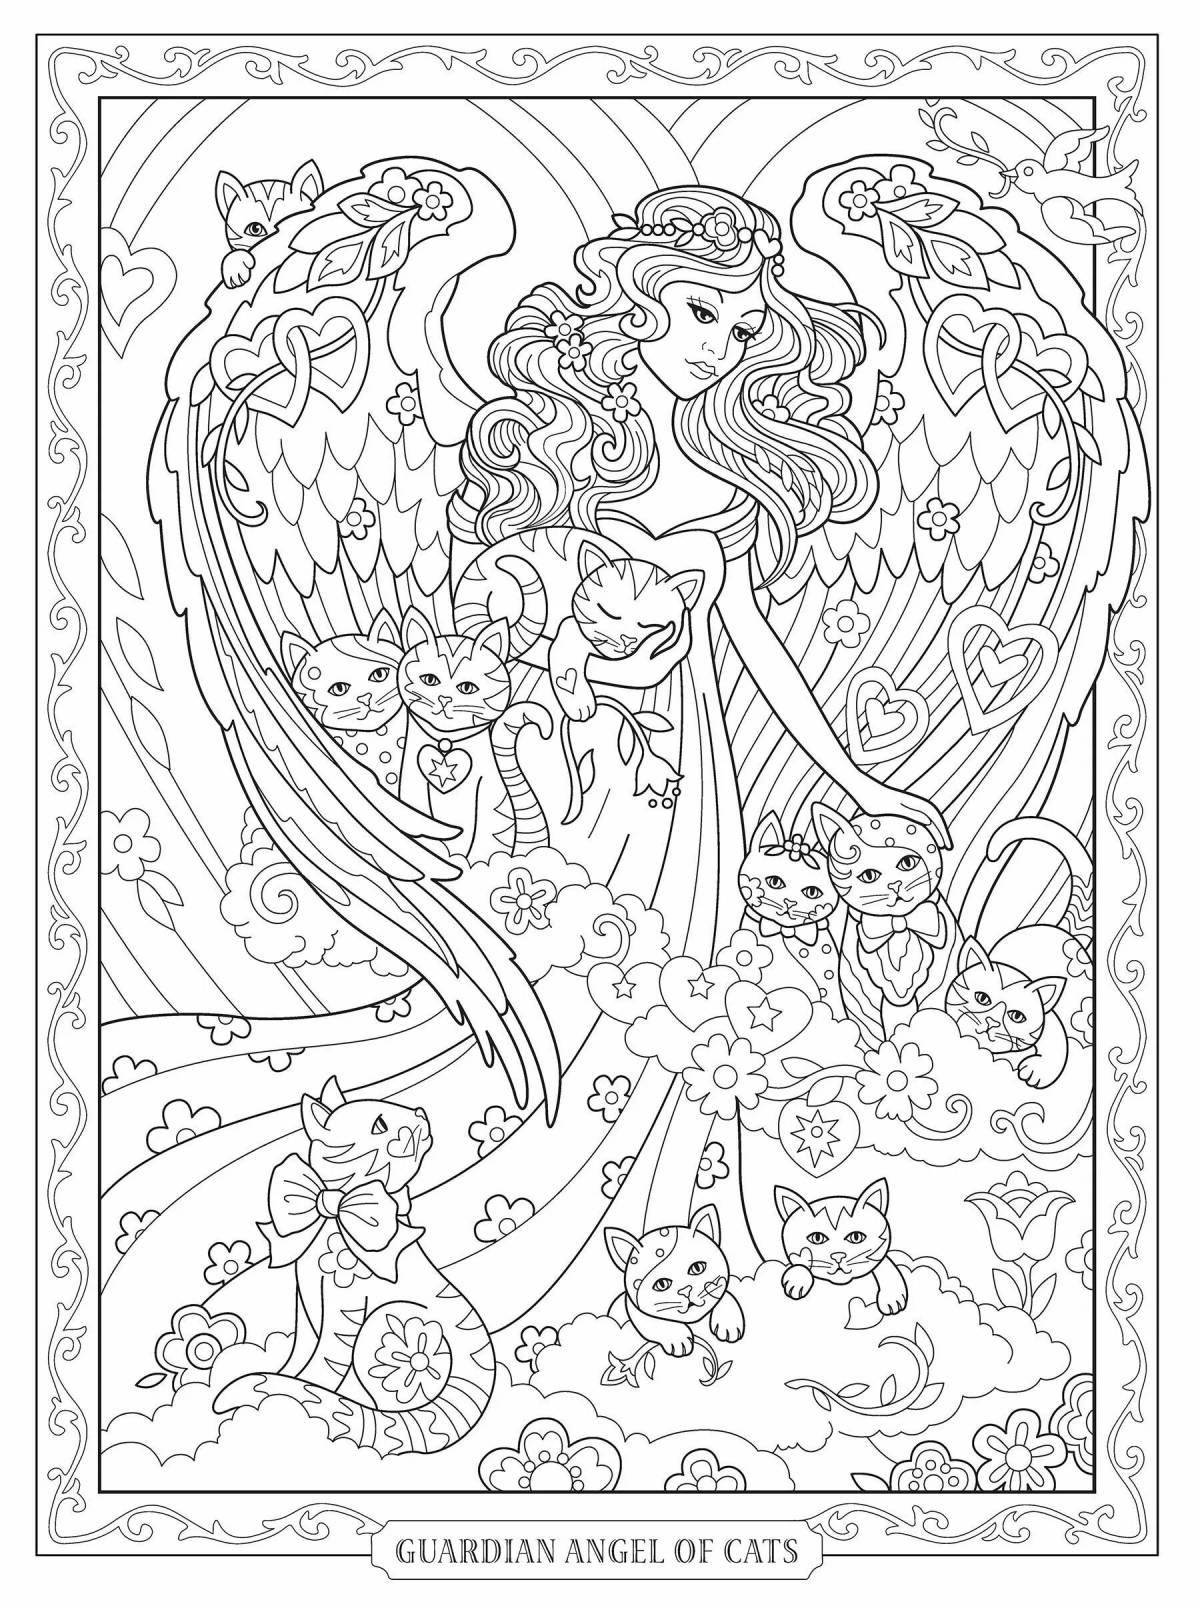 Blessed angel antistress coloring book